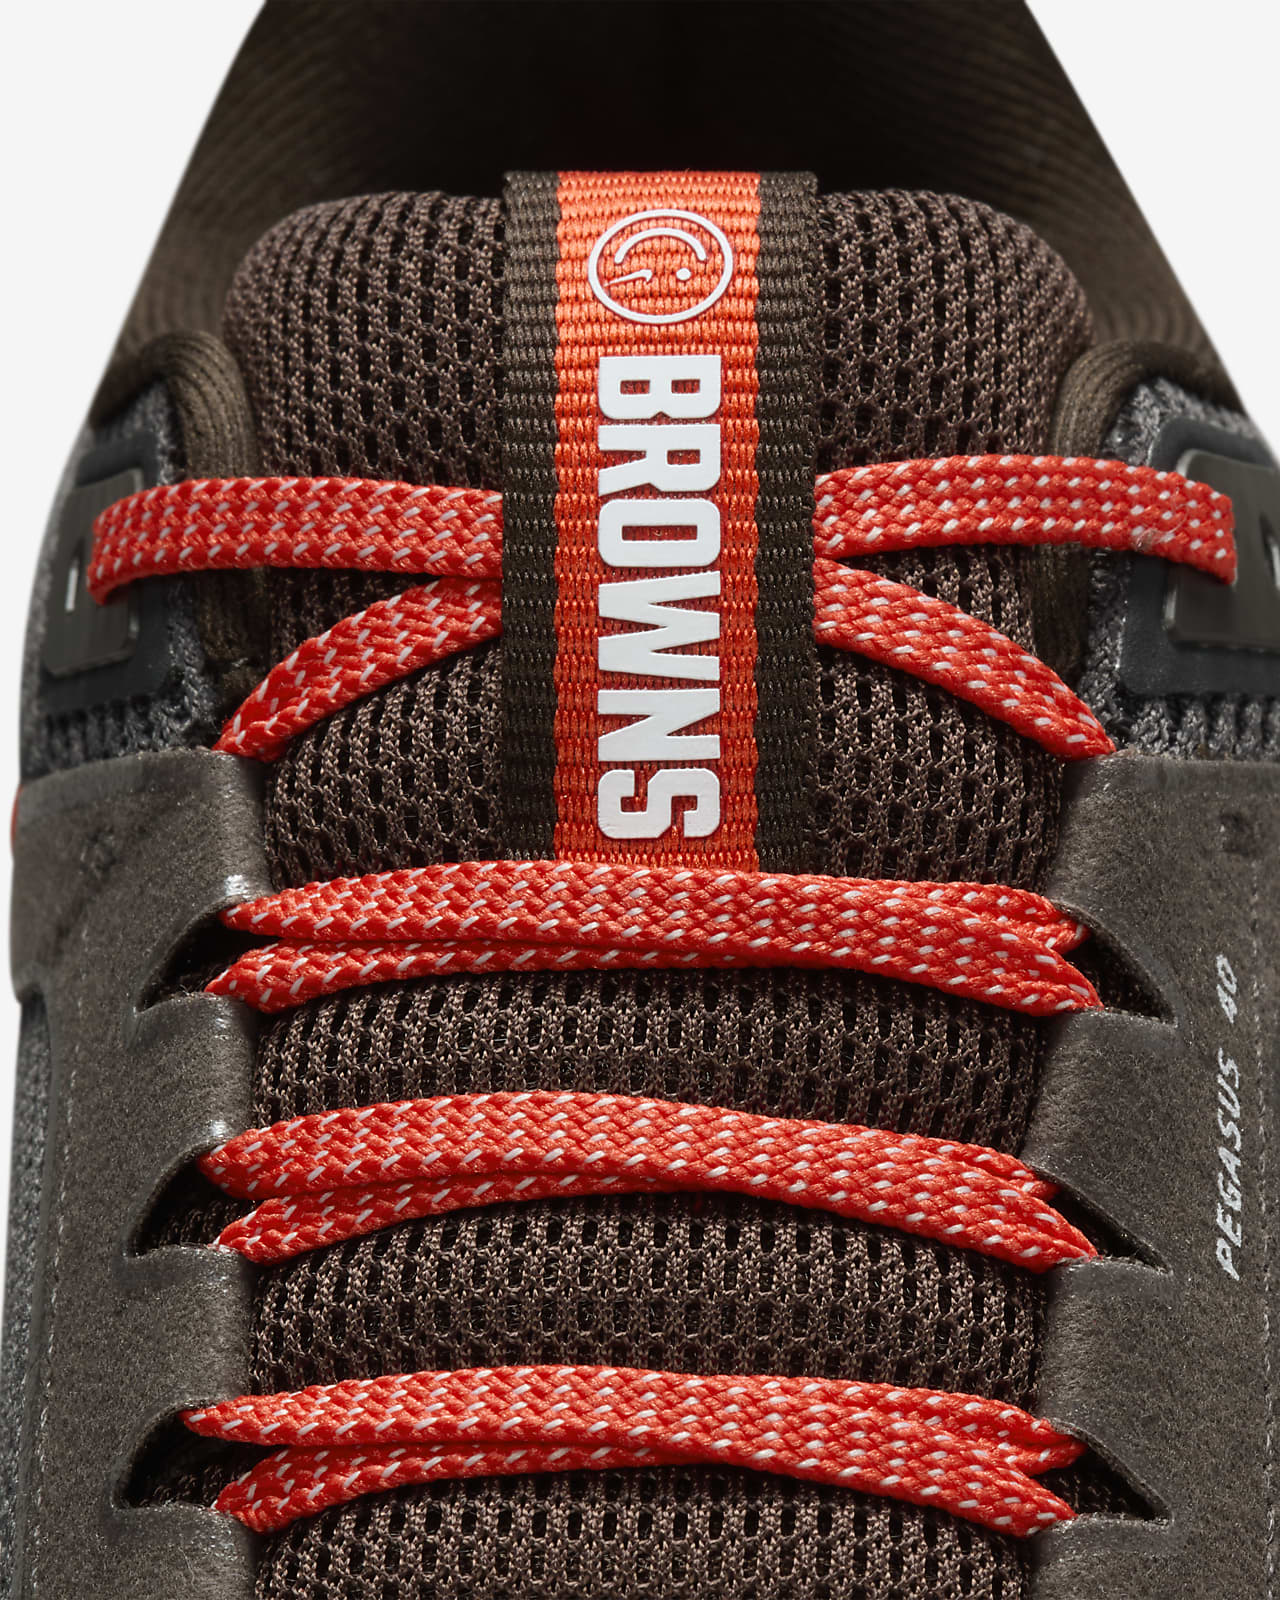 women's cleveland browns tennis shoes